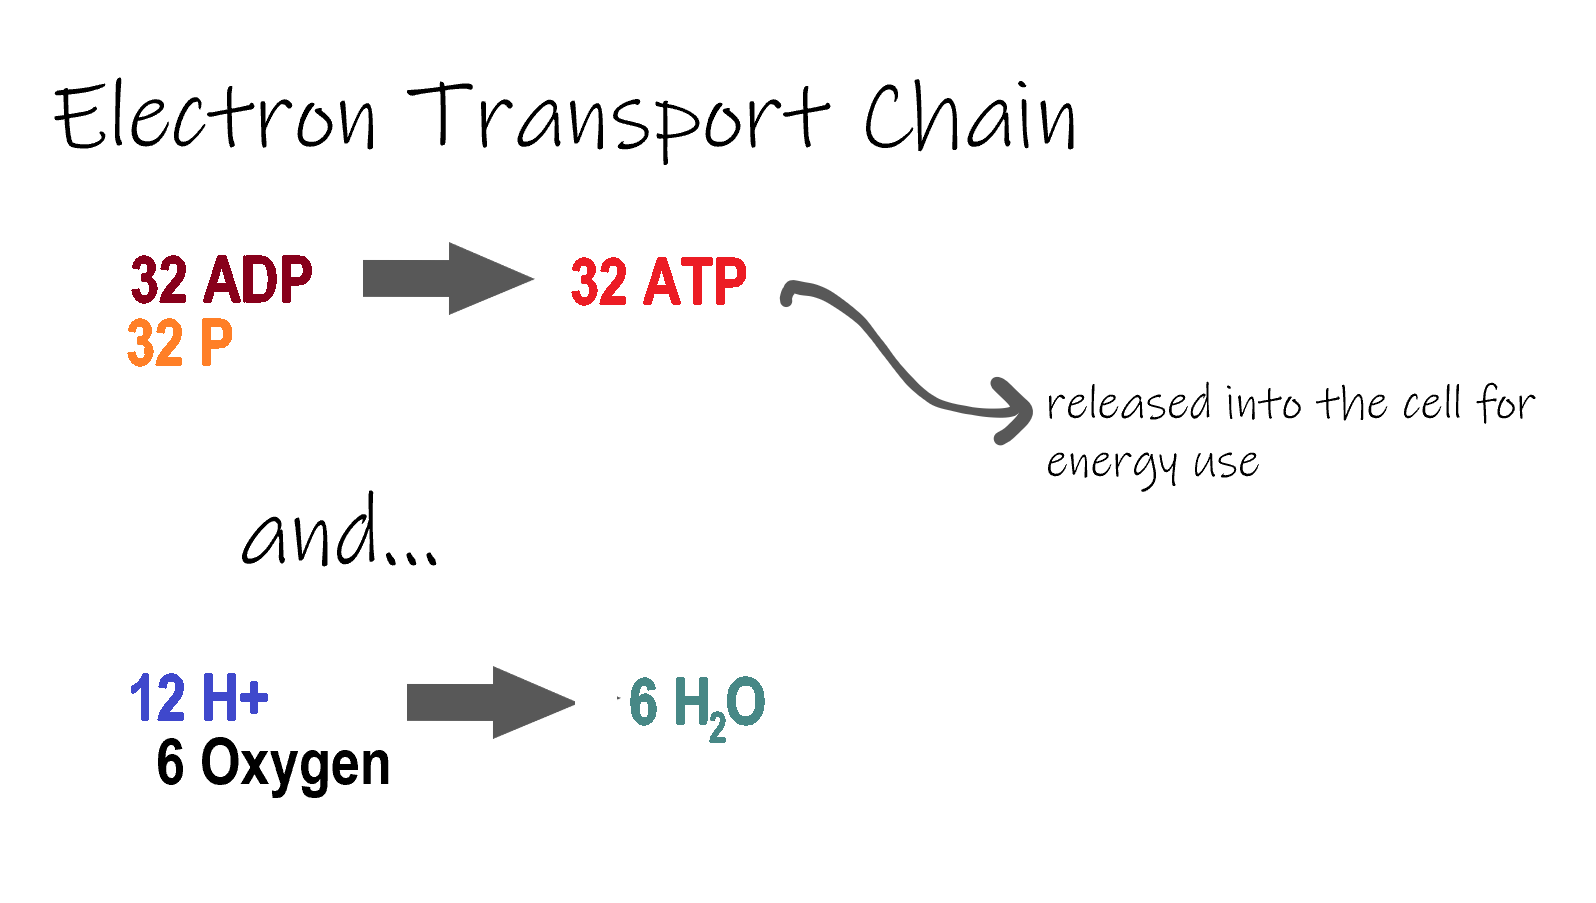 Image shows the reactants and products of the electron transport chain. In this stage, 32 adenosine diphosphate and 32 inorganic phosphates combine to form 32 ATP. In addition, hydrogen and oxygen combine to form 6 molecules of water.